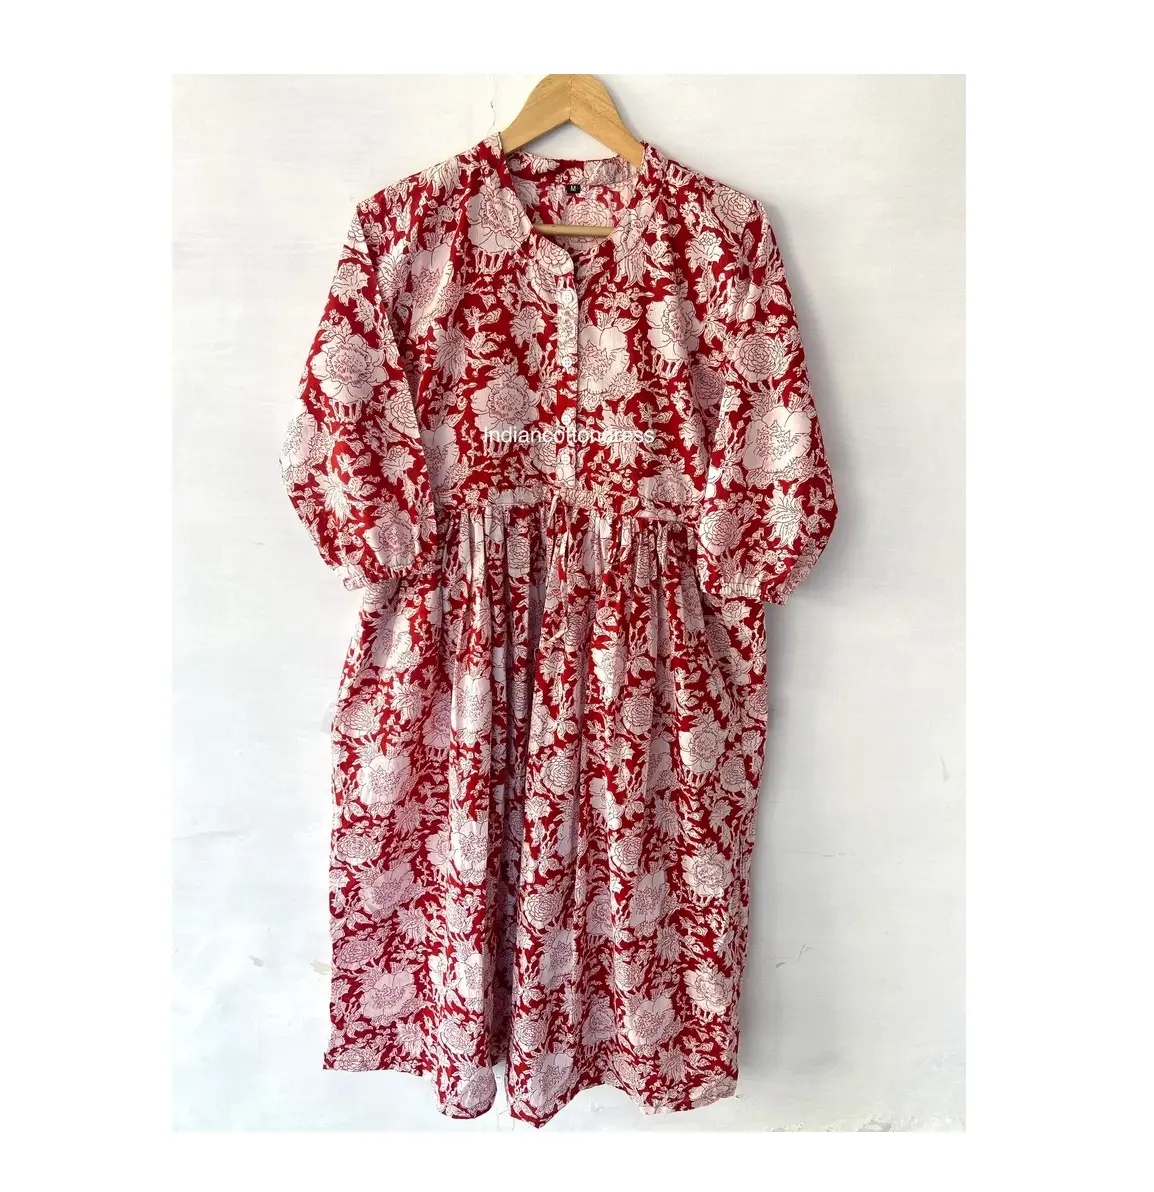 Hot Selling Handmade Cotton Dress Handblock Printed for Summer Wear Available at Wholesale Prices for sale